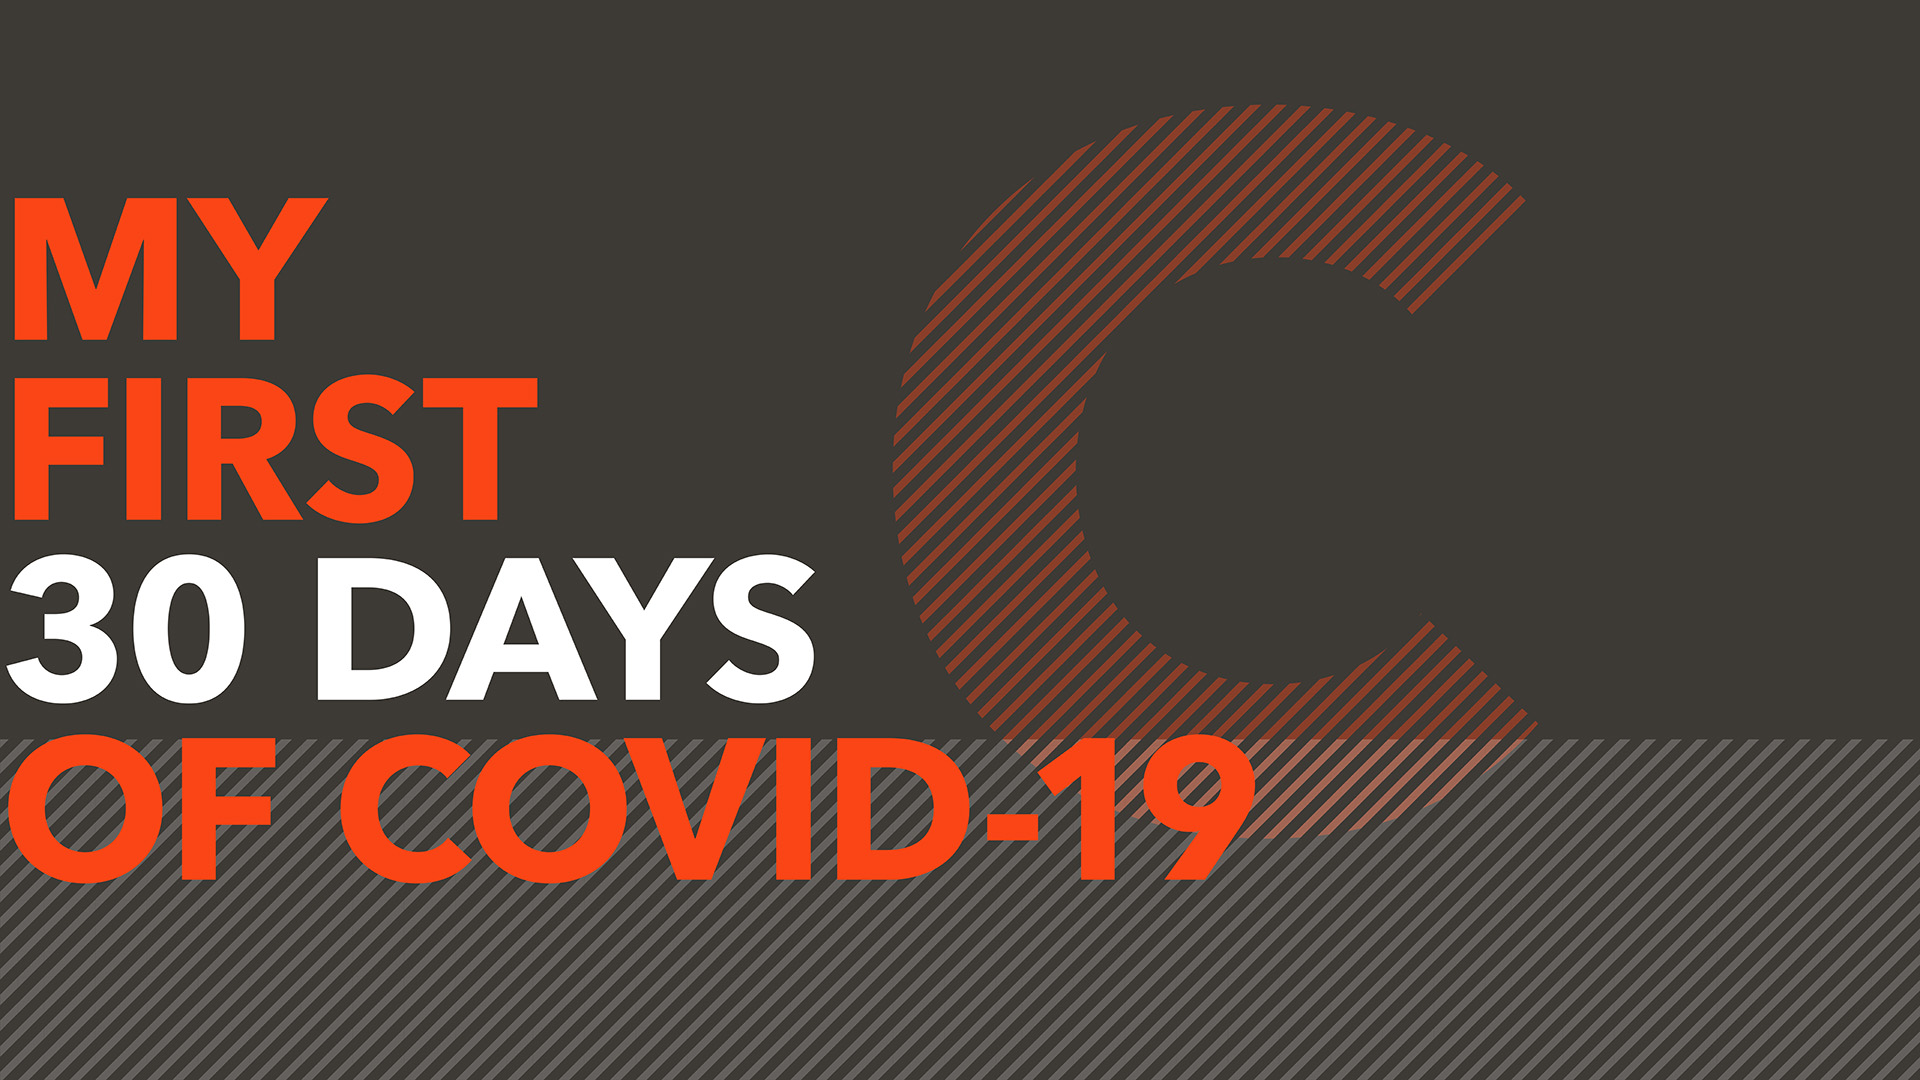 My first 30 days of COVID-19